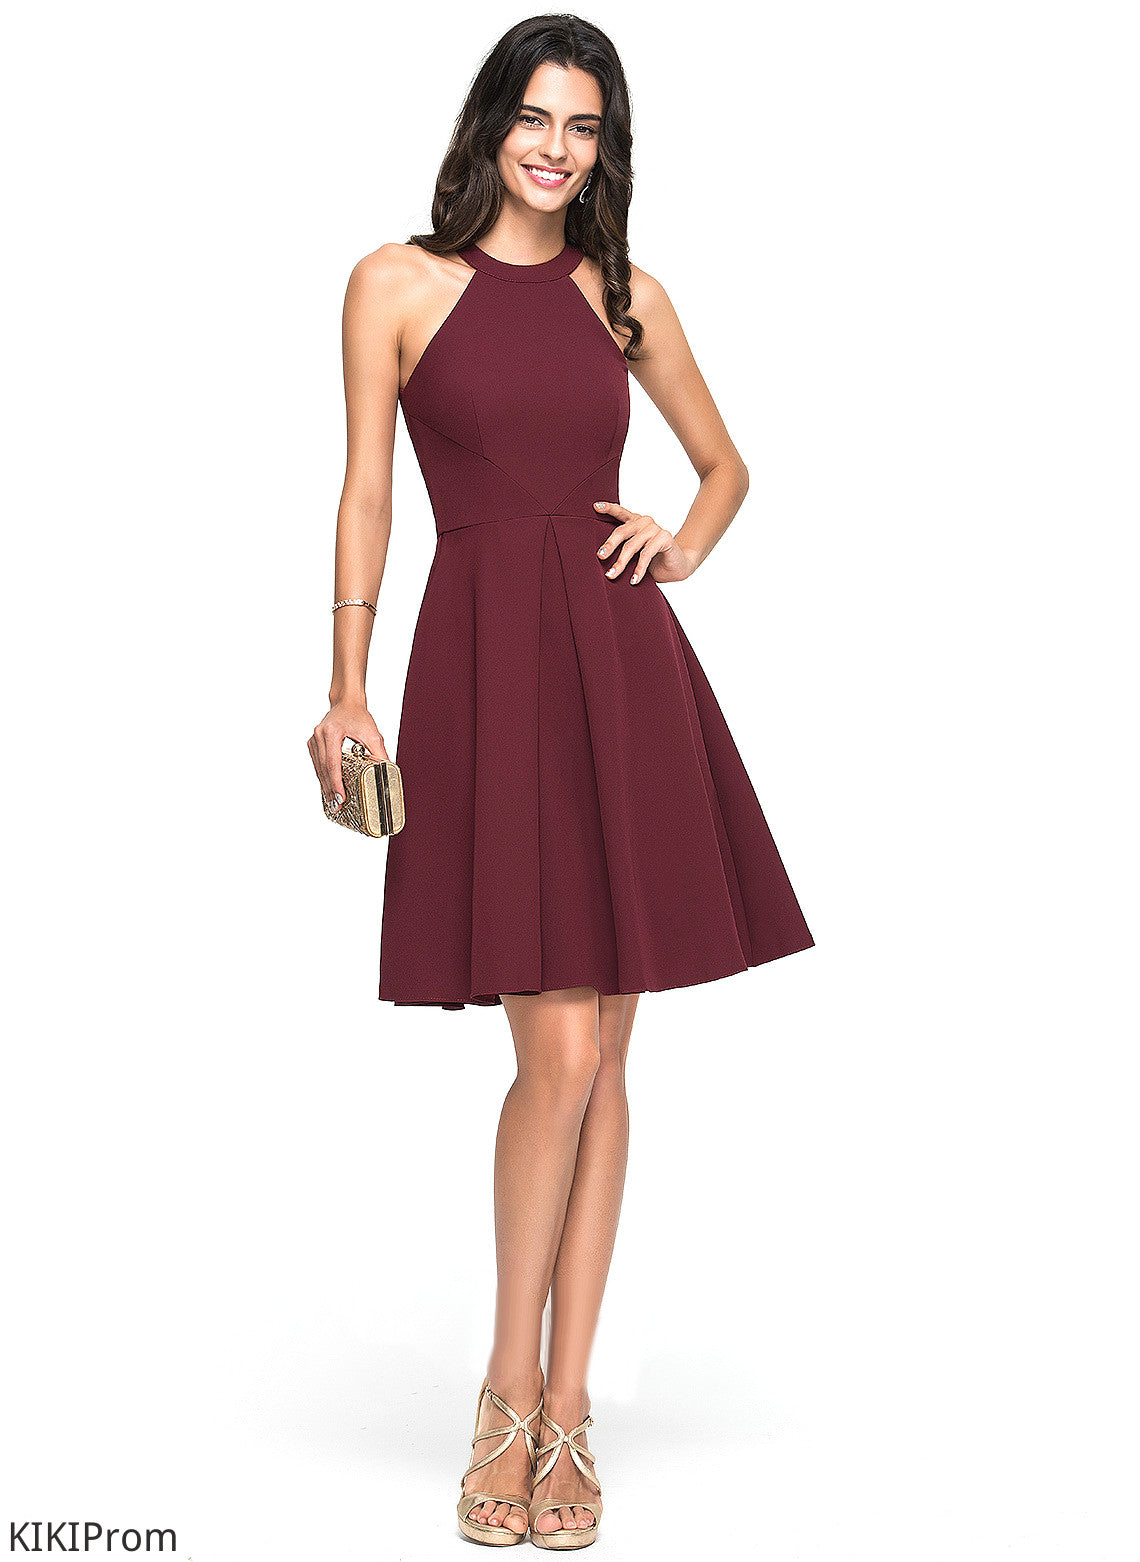 Satin Ruffle Homecoming Dresses With Erica Scoop Neck Homecoming Dress Knee-Length A-Line